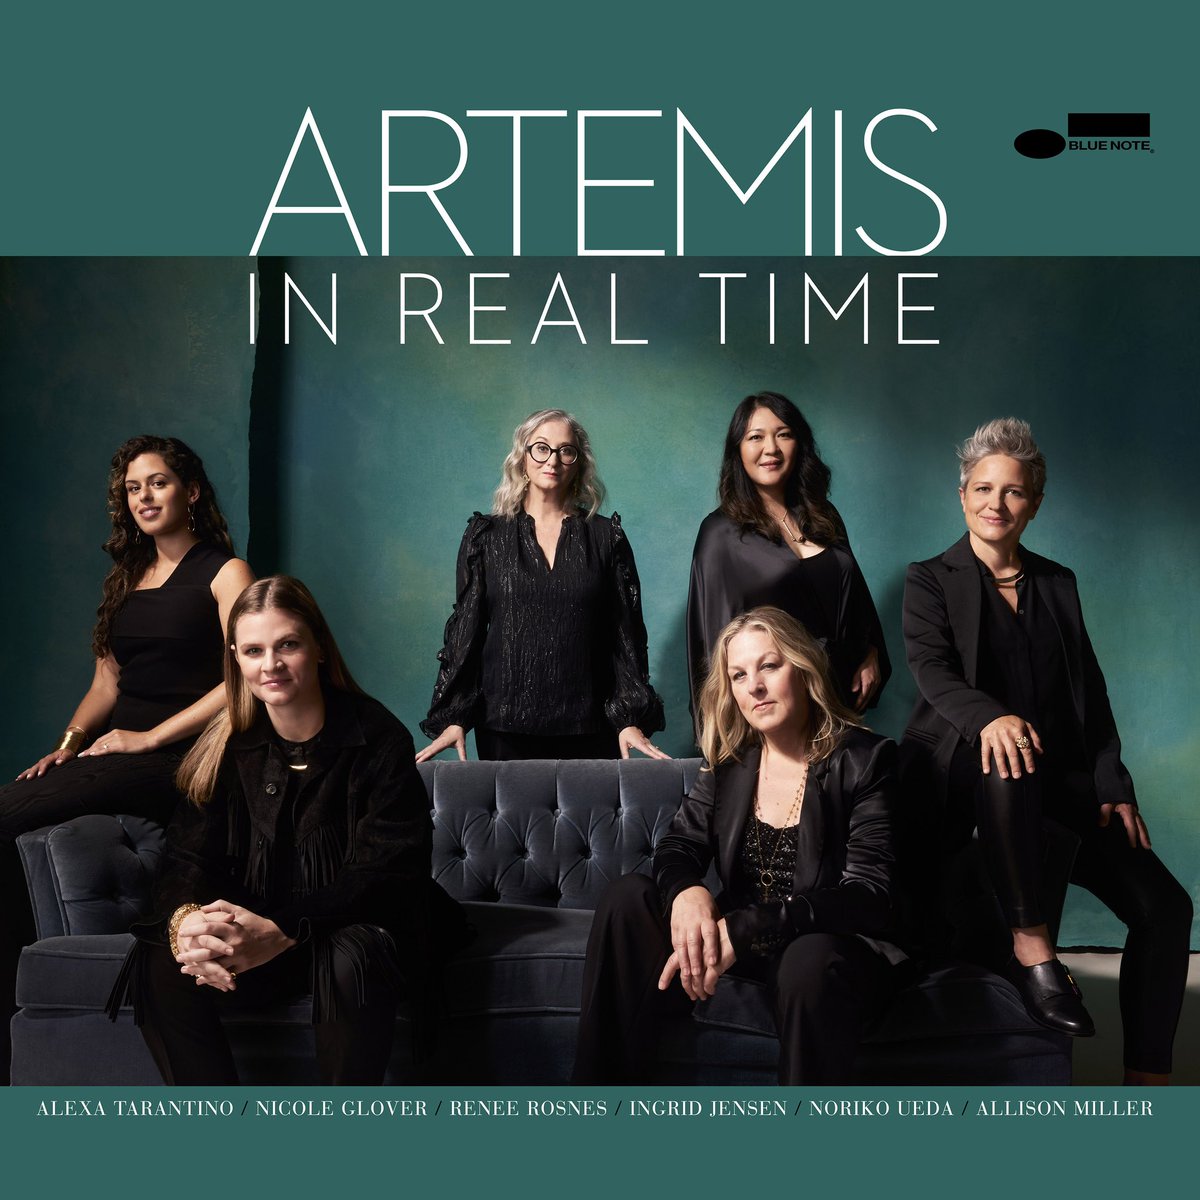 .@ArtemisJazz released their 2nd Blue Note album 'In Real Time' one year ago today & it's our ALBUM OF THE WEEK! Get all formats 20% off on the Blue Note Store, stream or download here: Artemis.lnk.to/InRealTime